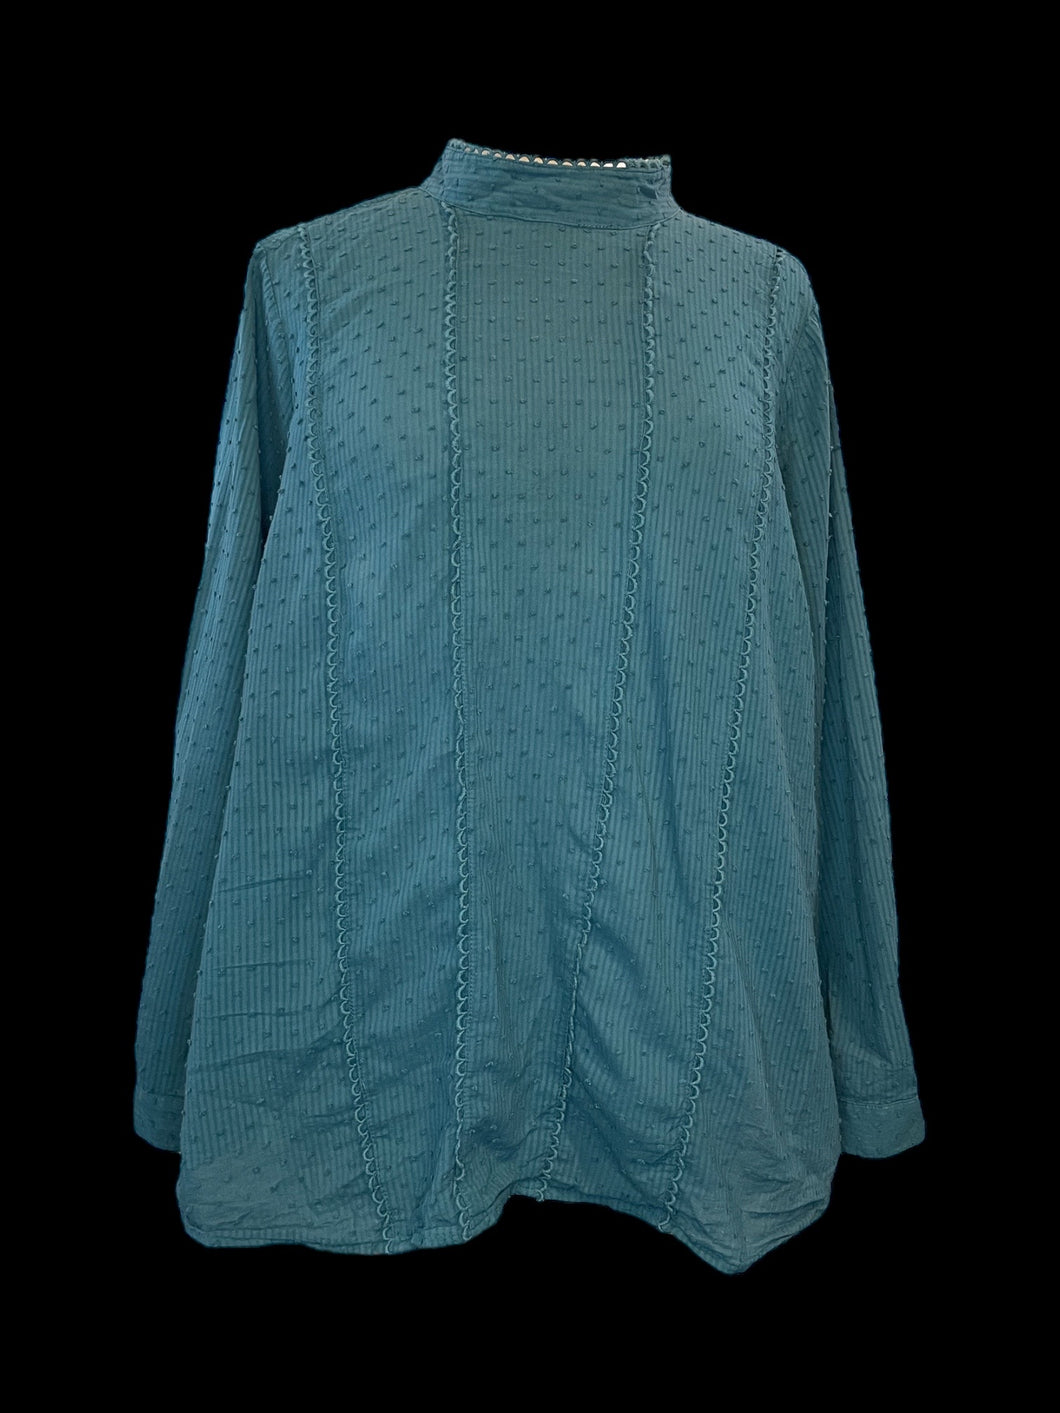 1X Teal cotton long sleeve high neckline top w/ embroidery details, button cuffs, scalloped accents, & two button keyhole closure